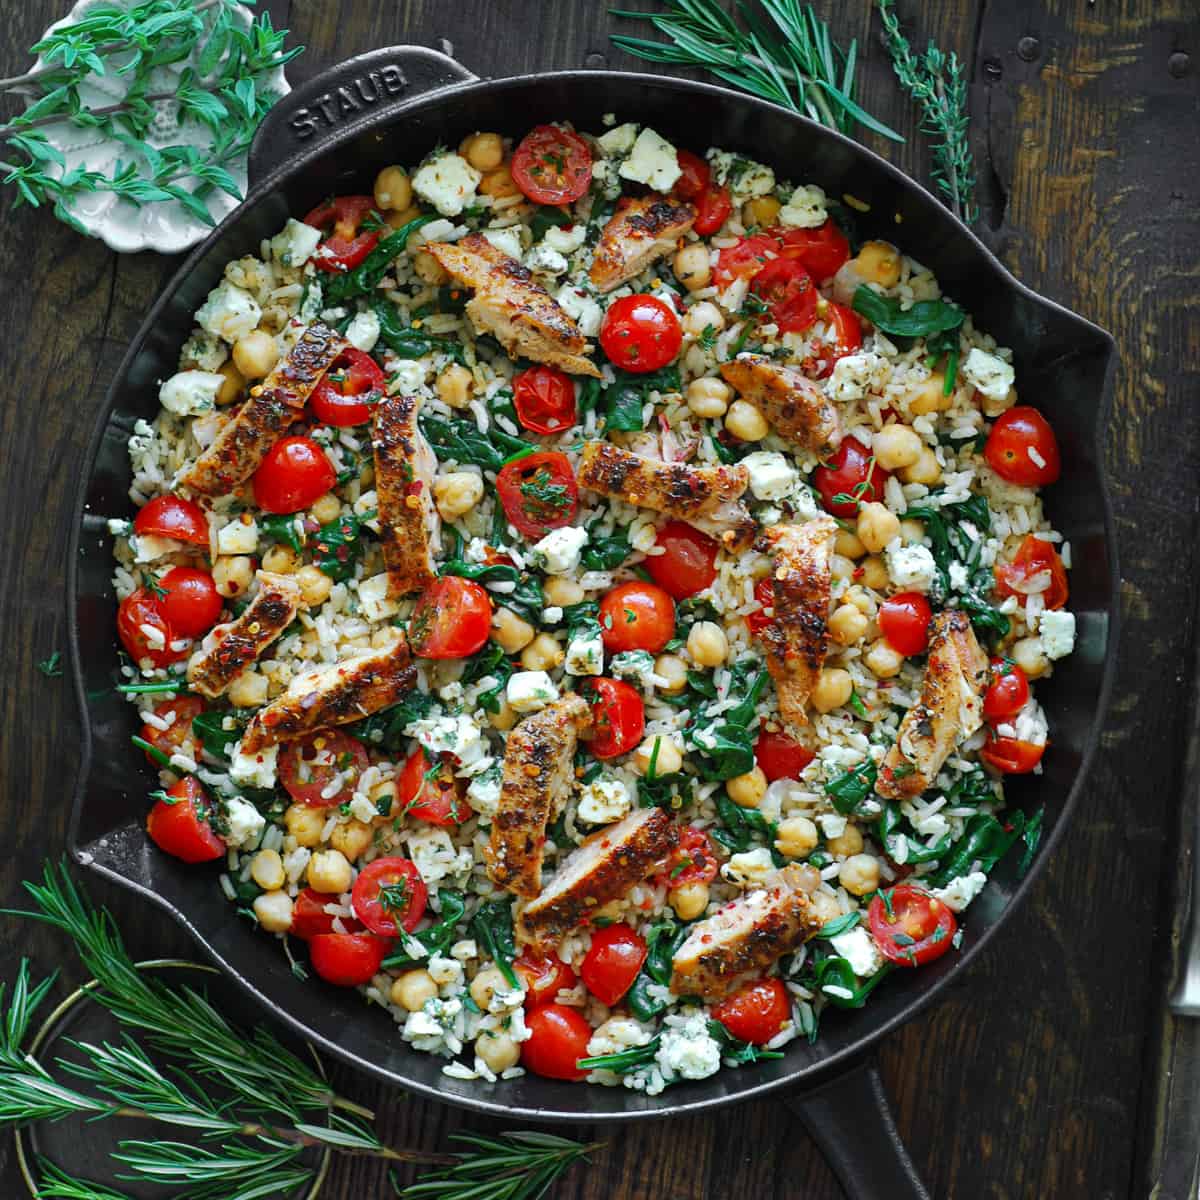 Greek Chicken and Lemon Rice with spinach, grape tomatoes, chickpeas, and feta cheese - in a cast iron skillet.